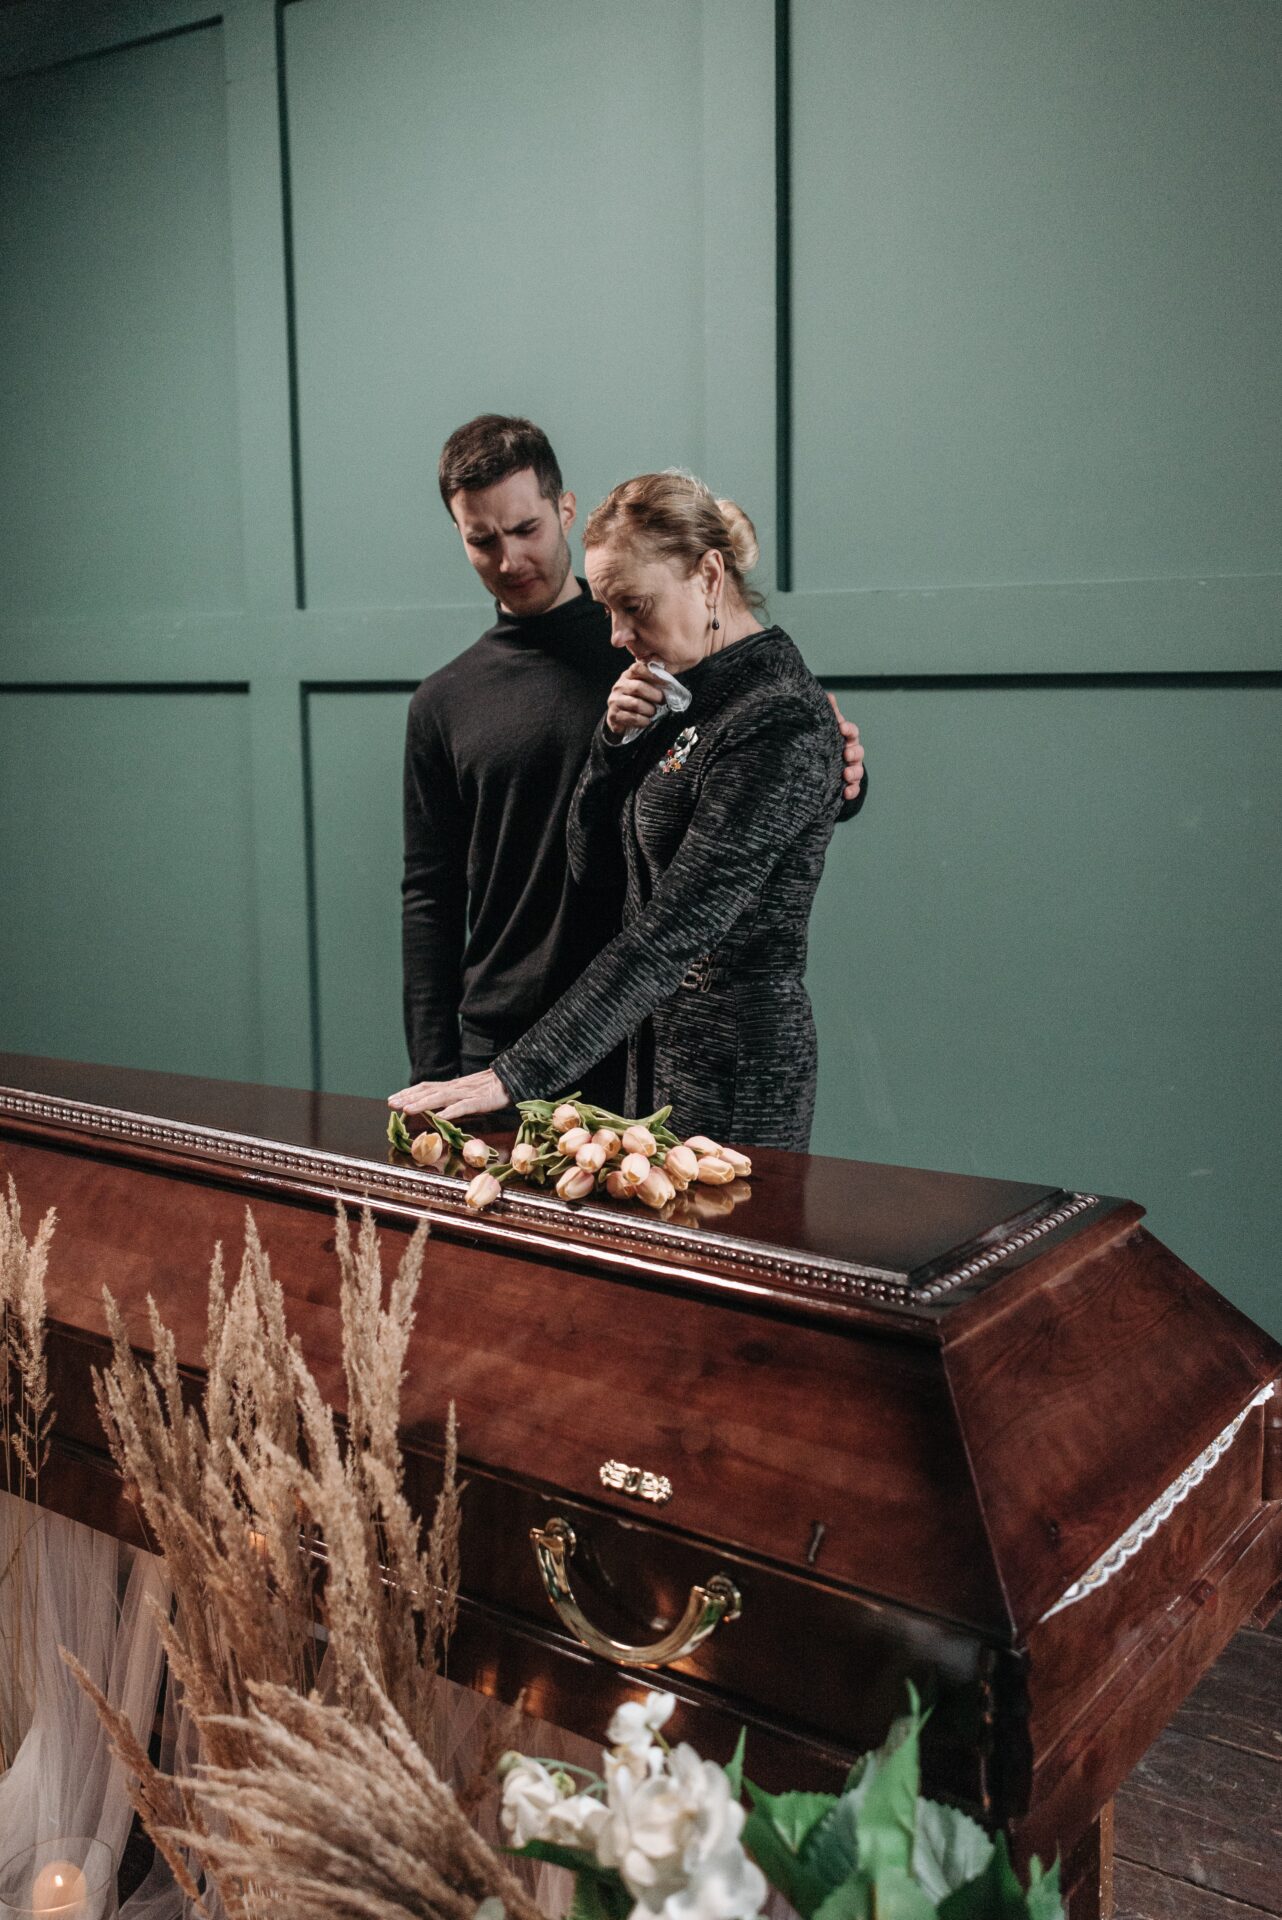 A man and woman standing next to a casket.